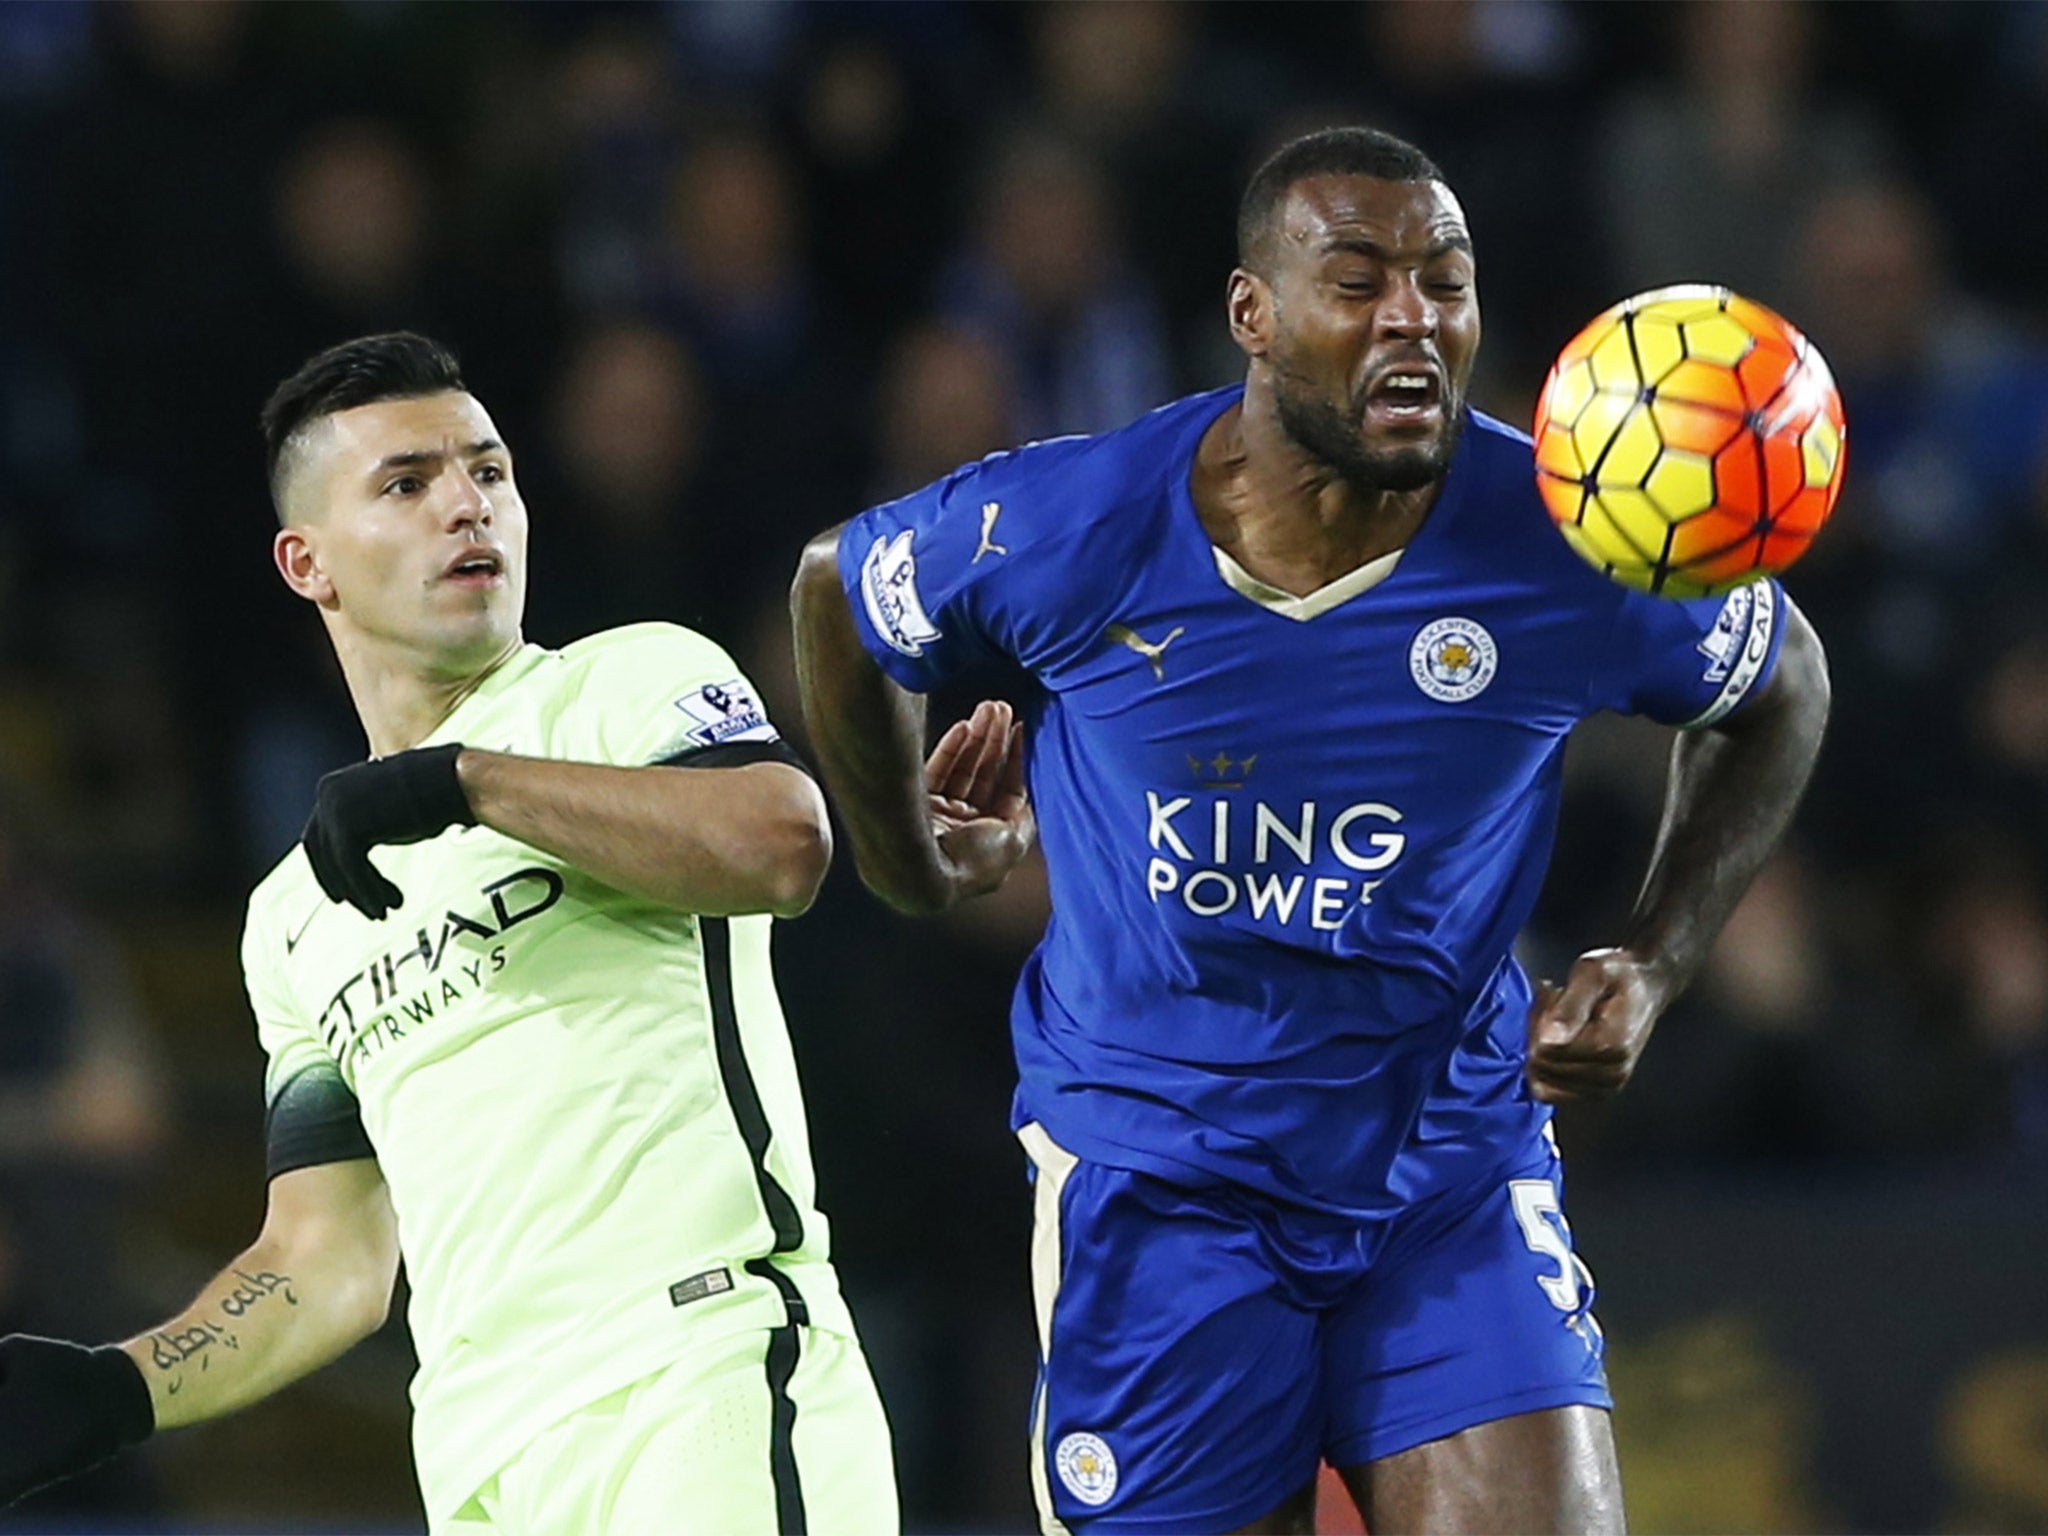 Wes Morgan hailed the 0-0 draw against Manchester City on Tuesday as a great result